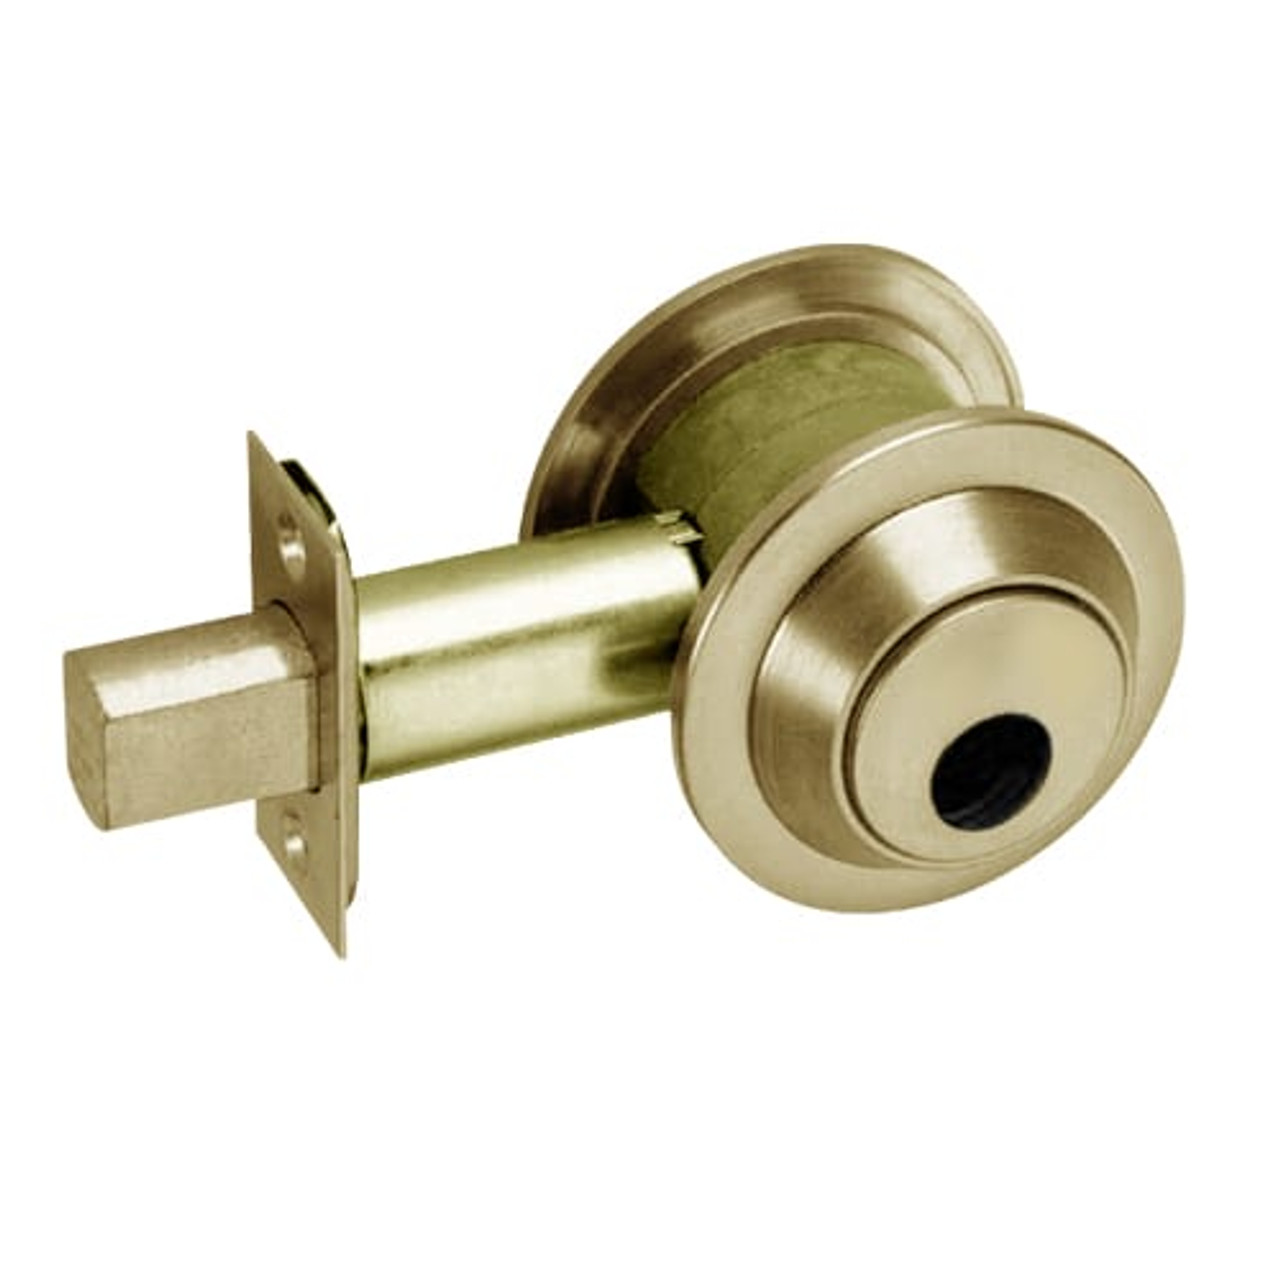 DL3013-606-LC Corbin DL3000 Series Cylindrical Deadlocks with Single Cylinder in Satin Brass Finish